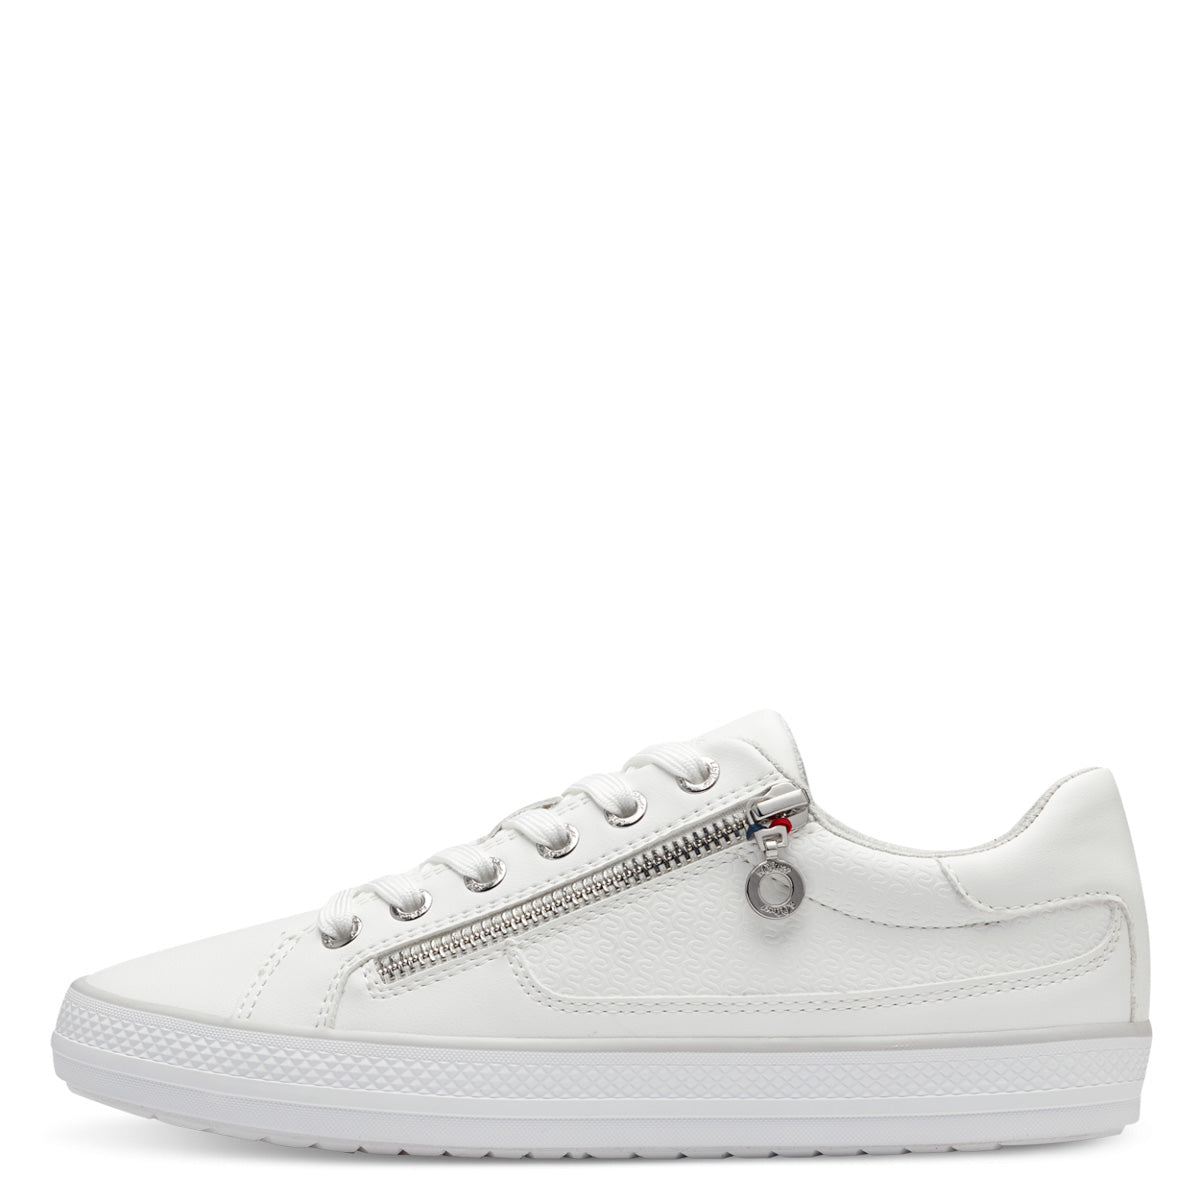 S.Oliver White Runner Style Sneakers for Women - Classic Comfort